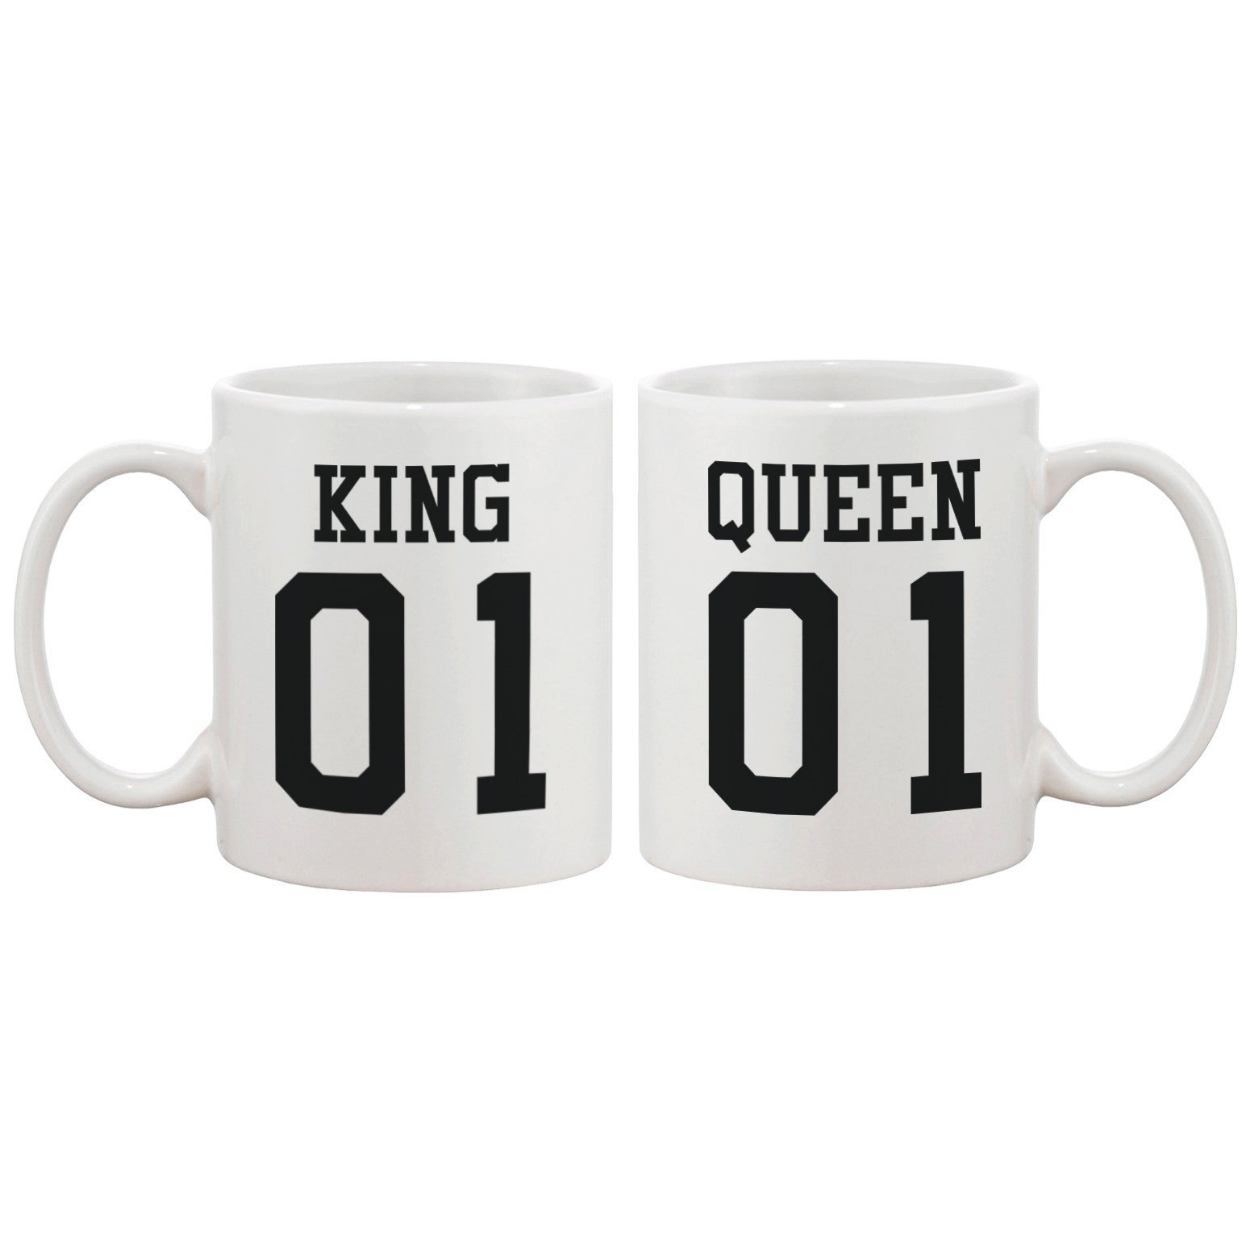 King 01 Queen 01 Couple Mug Cute Matching Ceramic Cups Gift for Couples